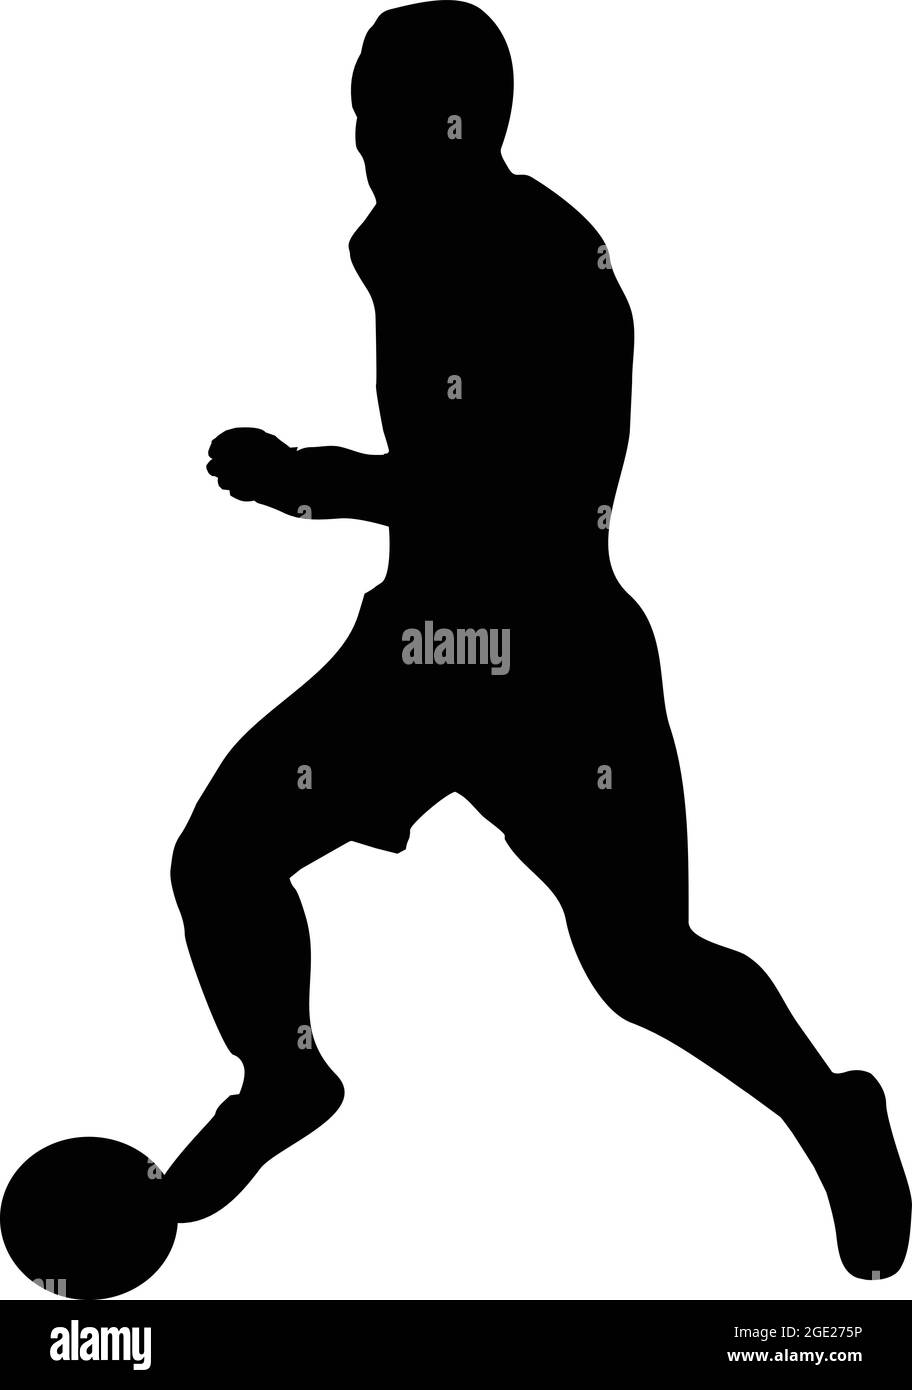 Football or soccer player silhouette. Player kicking ball isolated. Stock Vector